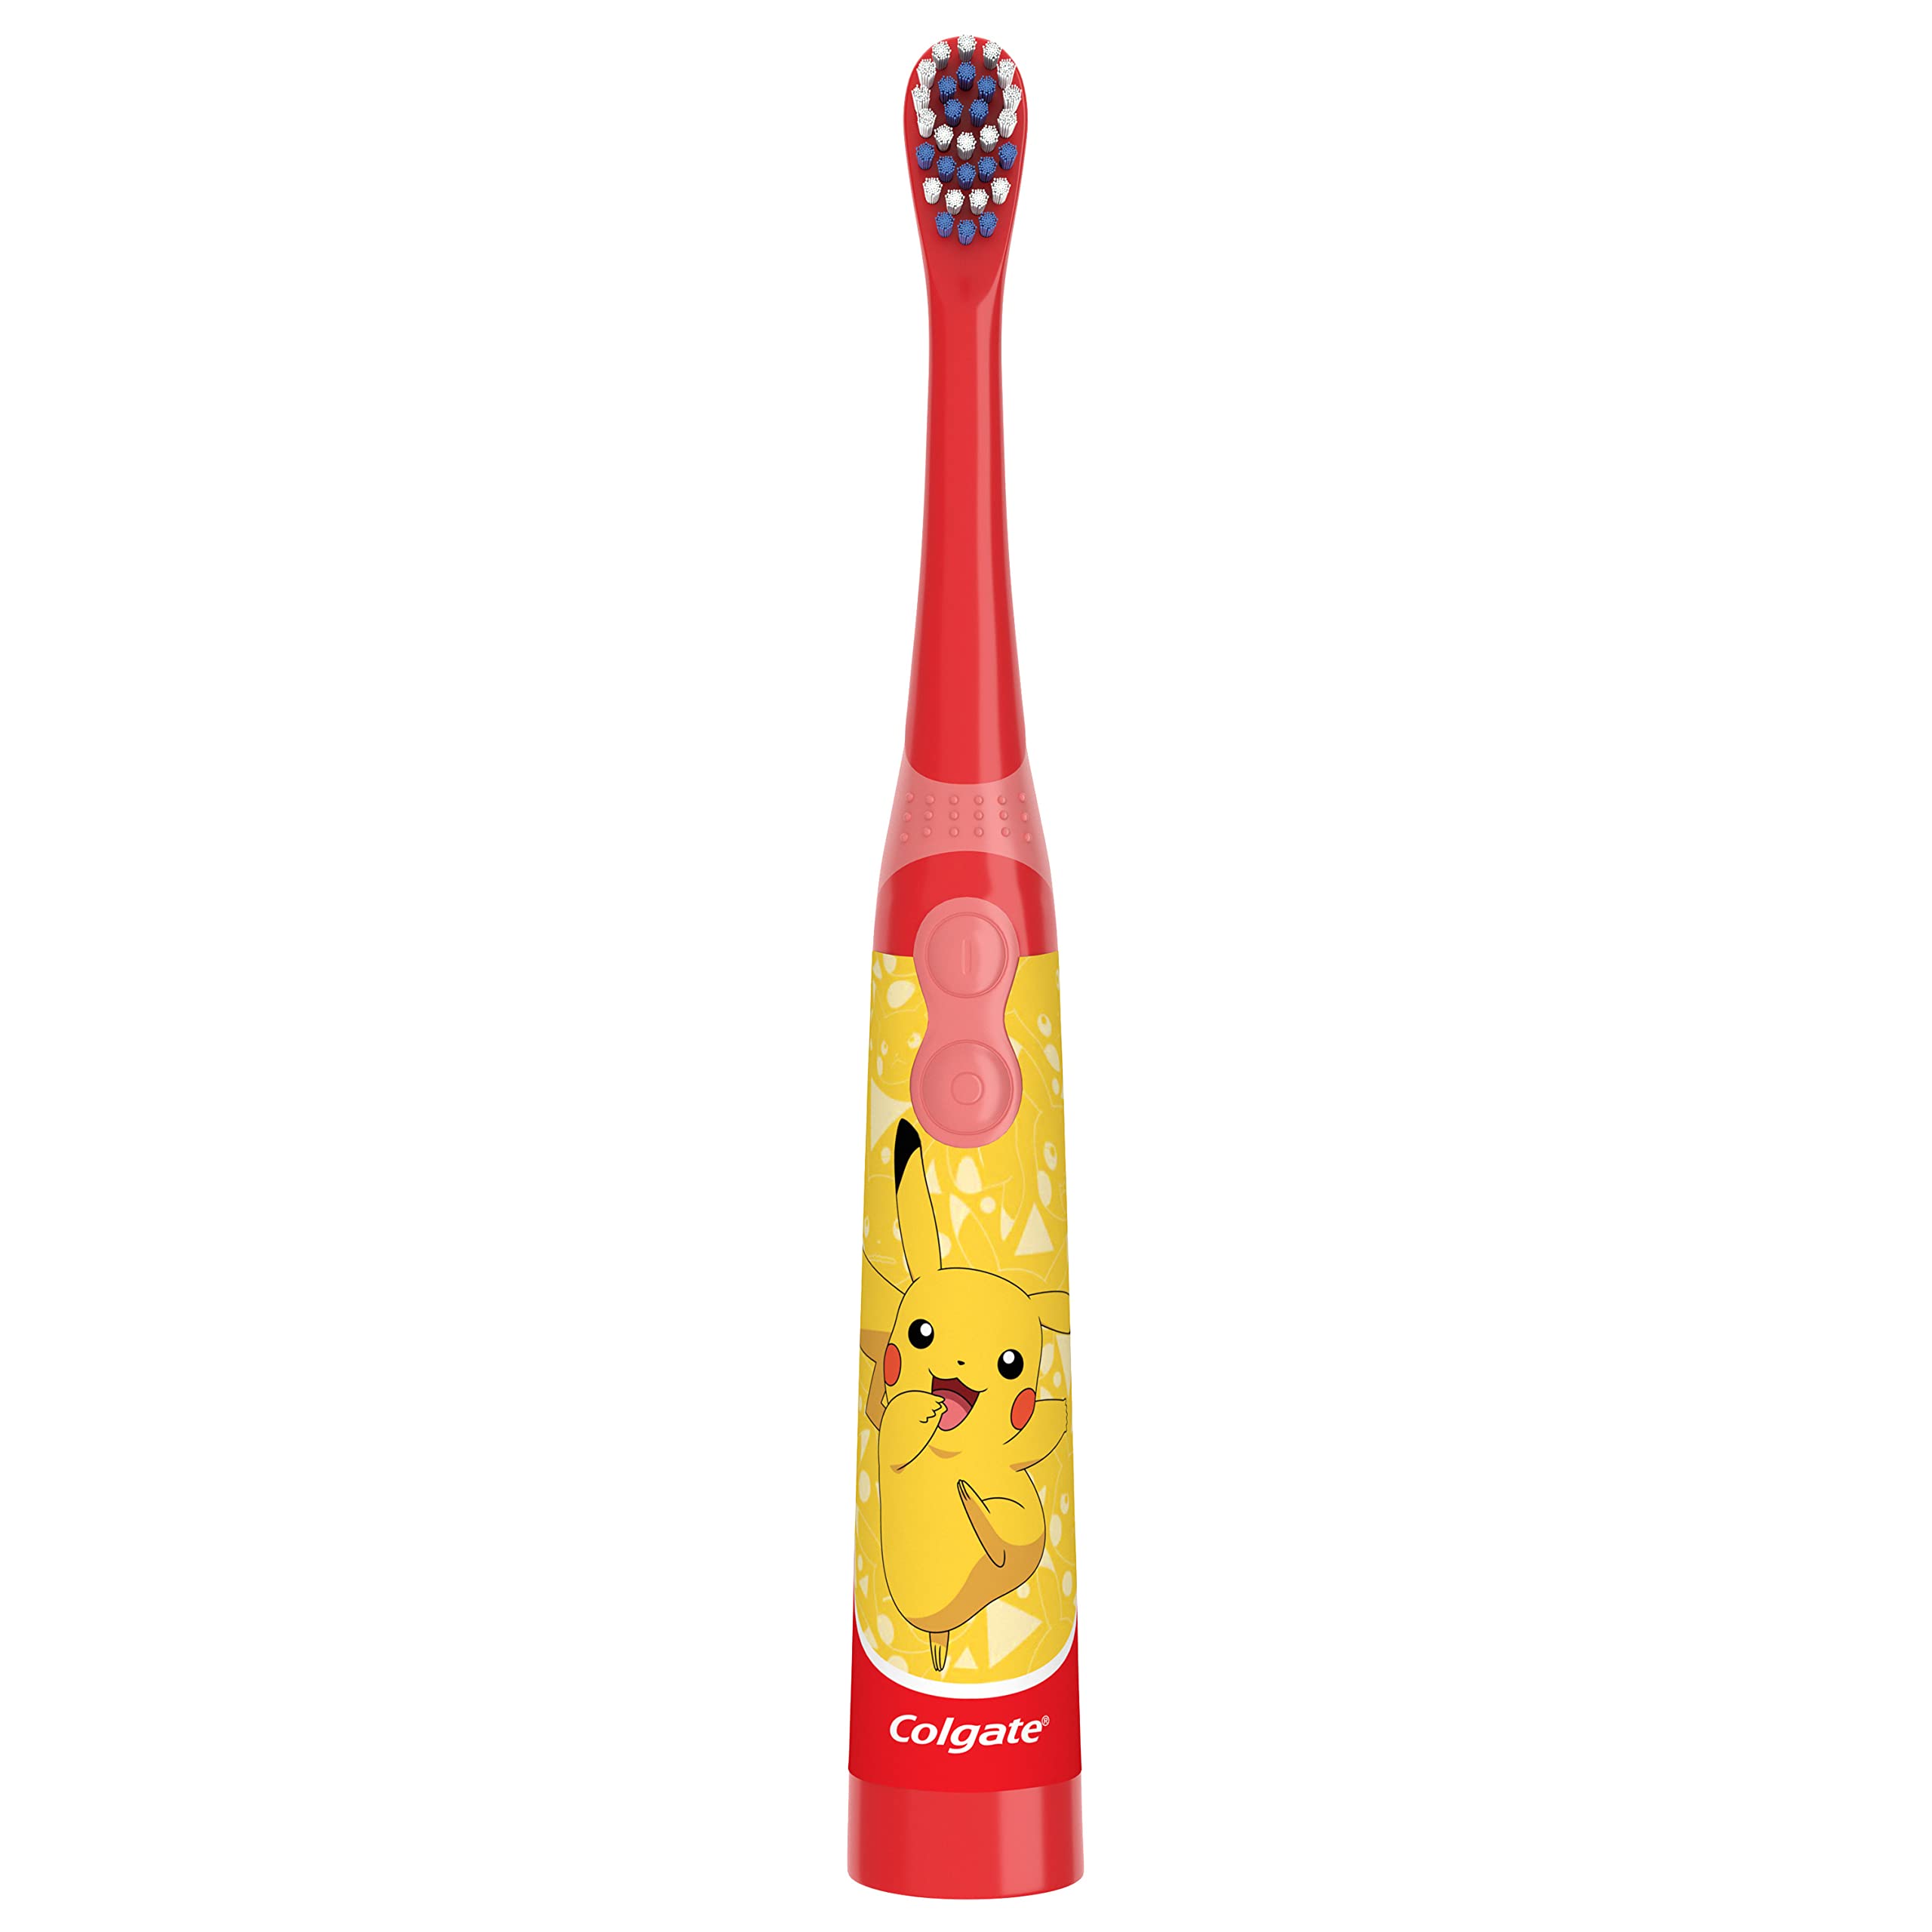 Colgate Kids Battery Powered Toothbrush, Kids Battery Toothbrush with Included AA Battery, Extra Soft Bristles, Flat-Laying Handle to Prevent Rolling, Pokemon Toothbrush, 1 Pack (Style May Vary)